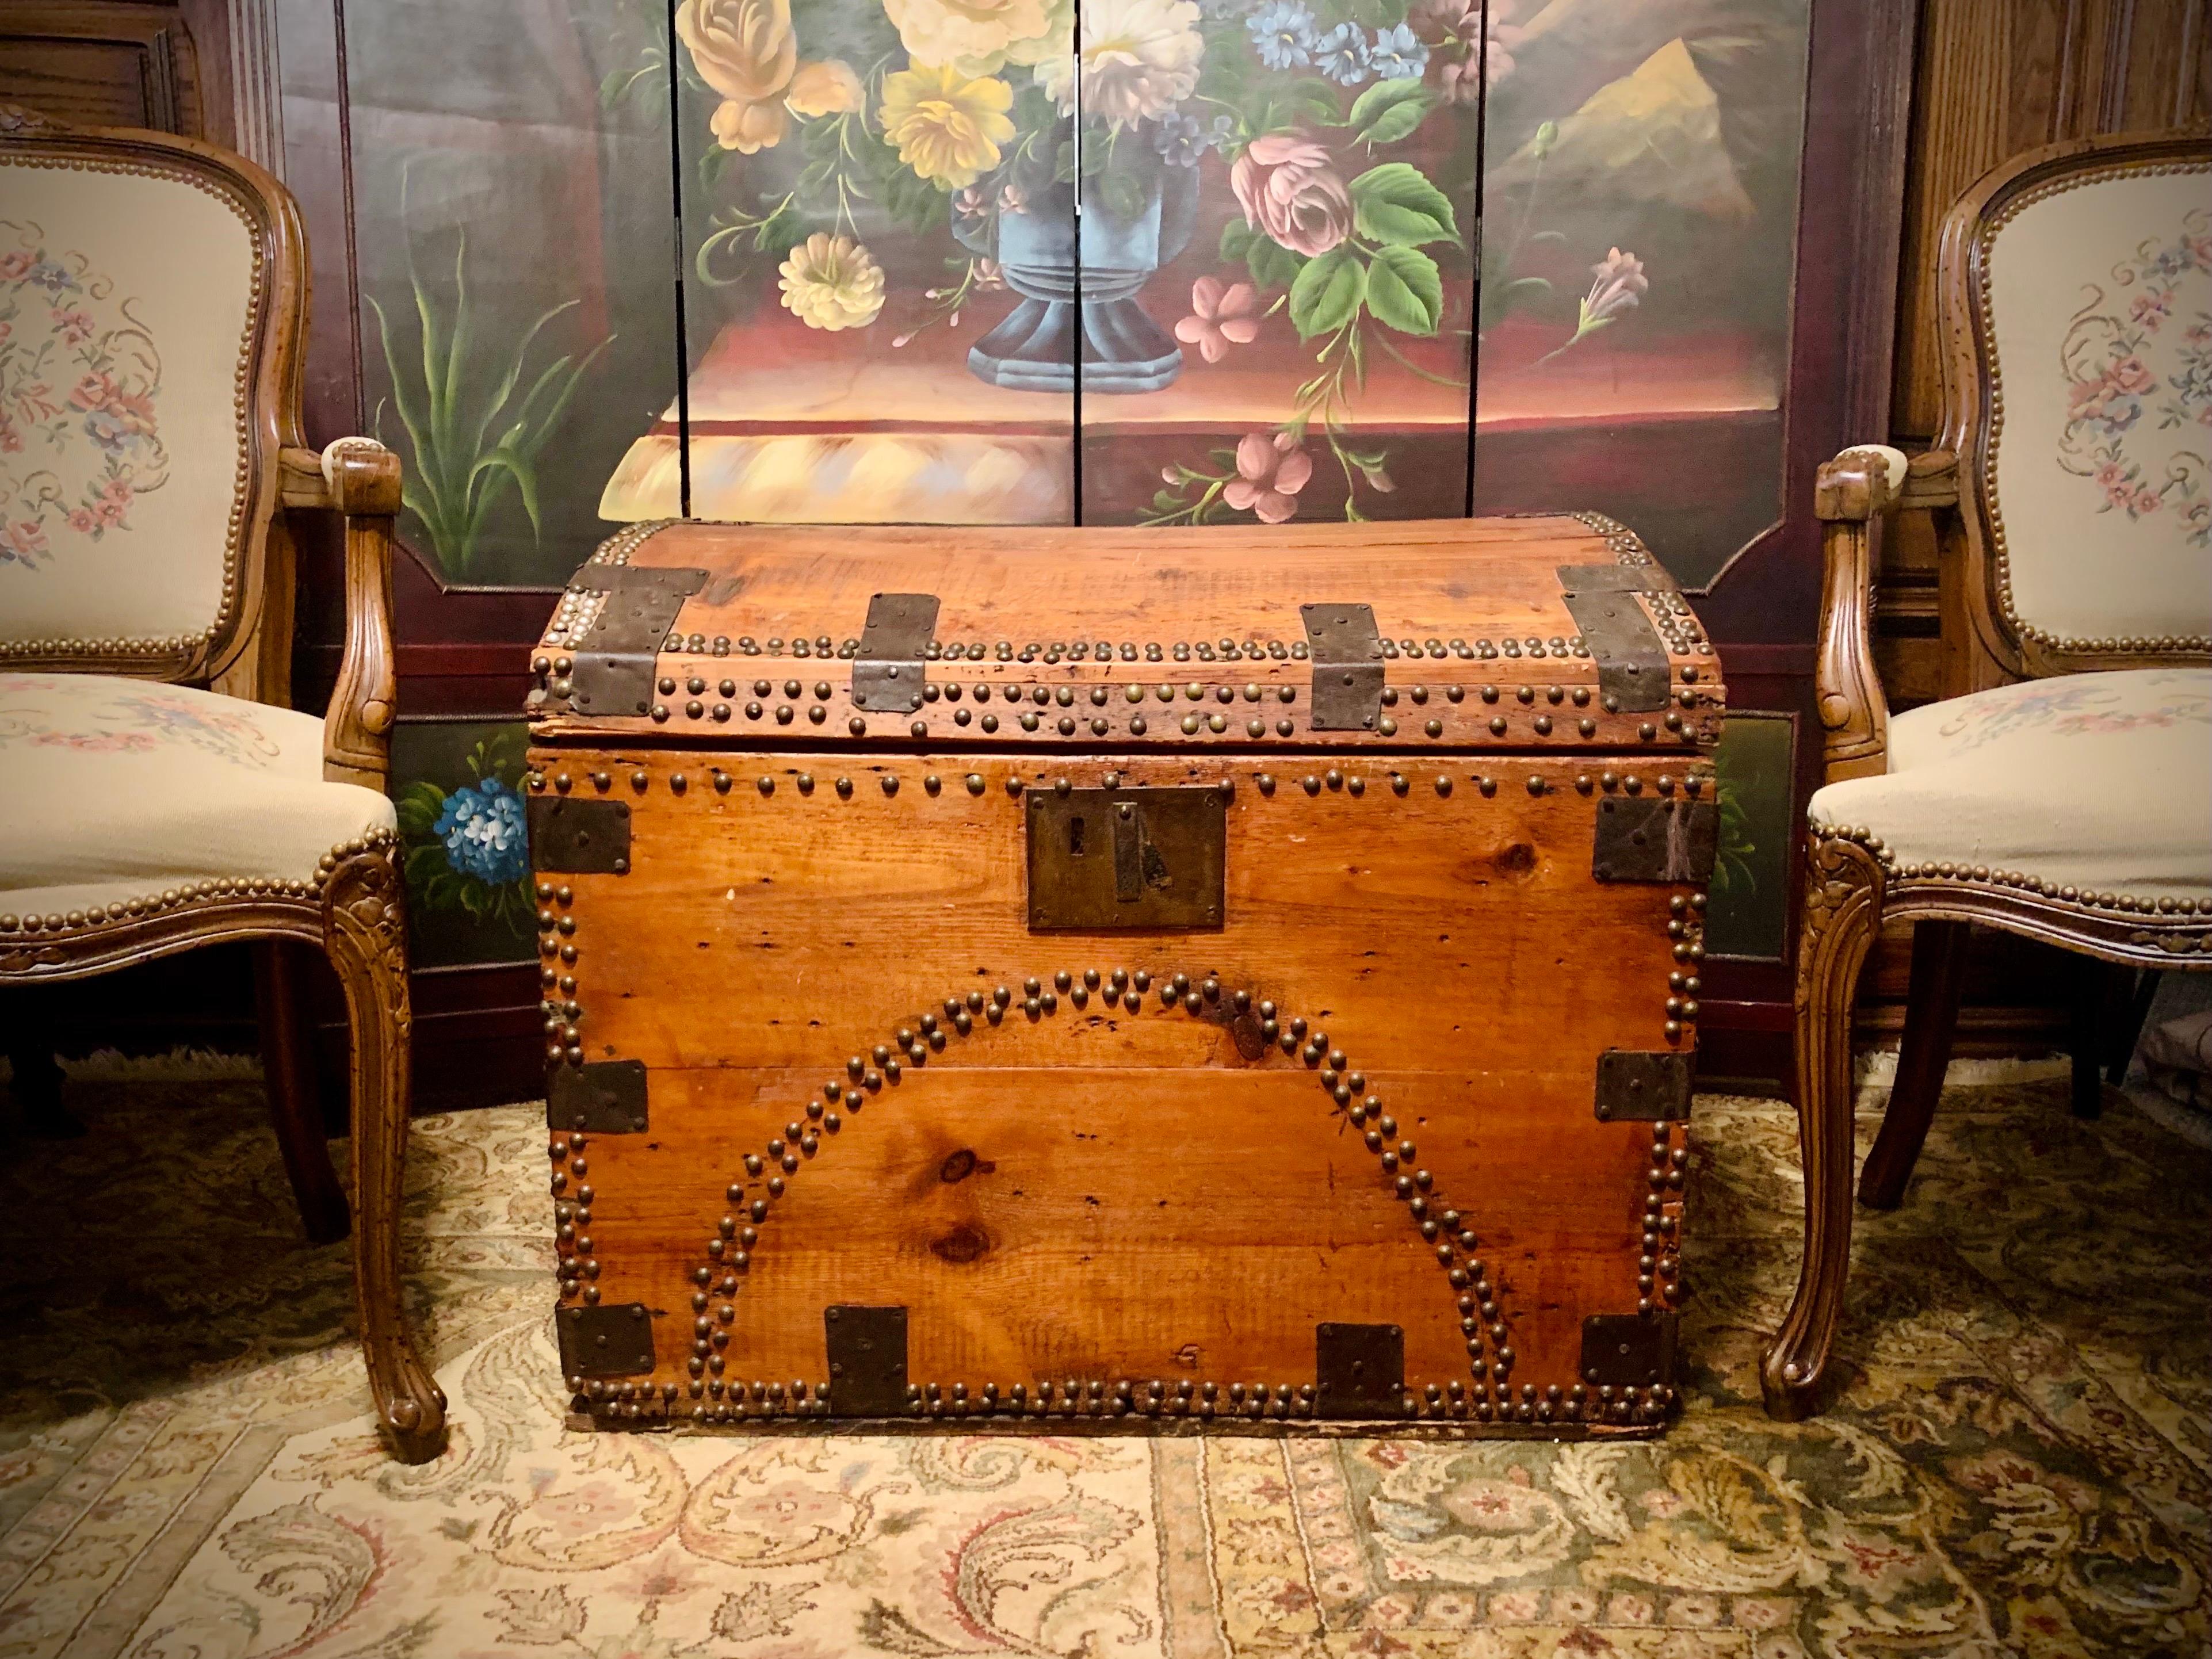 Circa 1860-1870’s this antique wooden chest is a real treasure. Handcrafted of red pine native to the east coast of North America, this piece originates from the time of the American Civil War (1861-1865).  Wrought iron hinges and studded tacks add